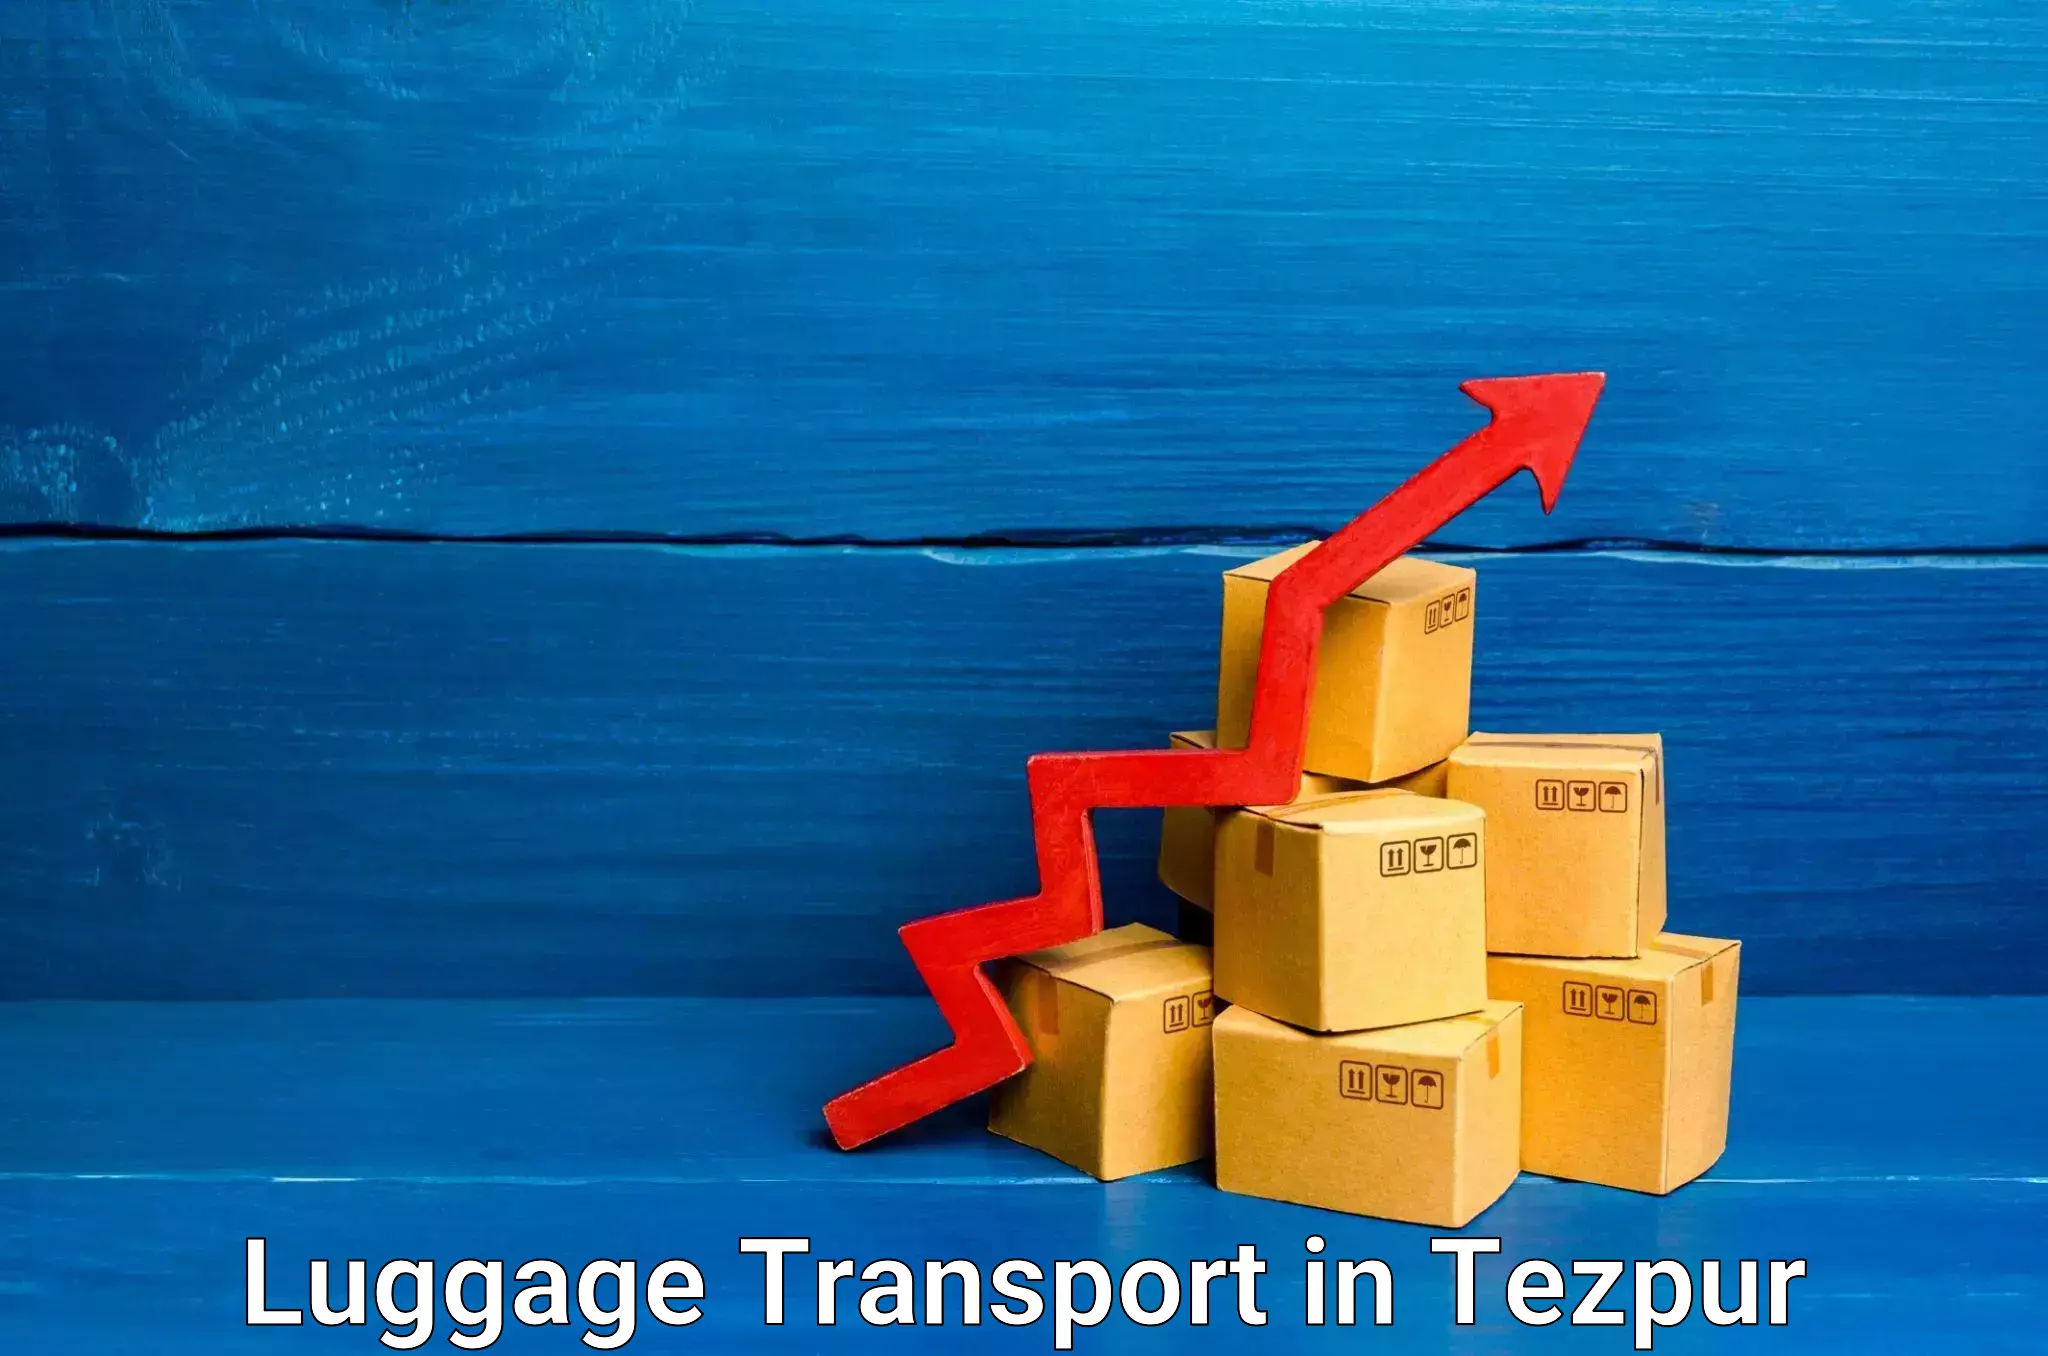 Luggage shipping service in Tezpur